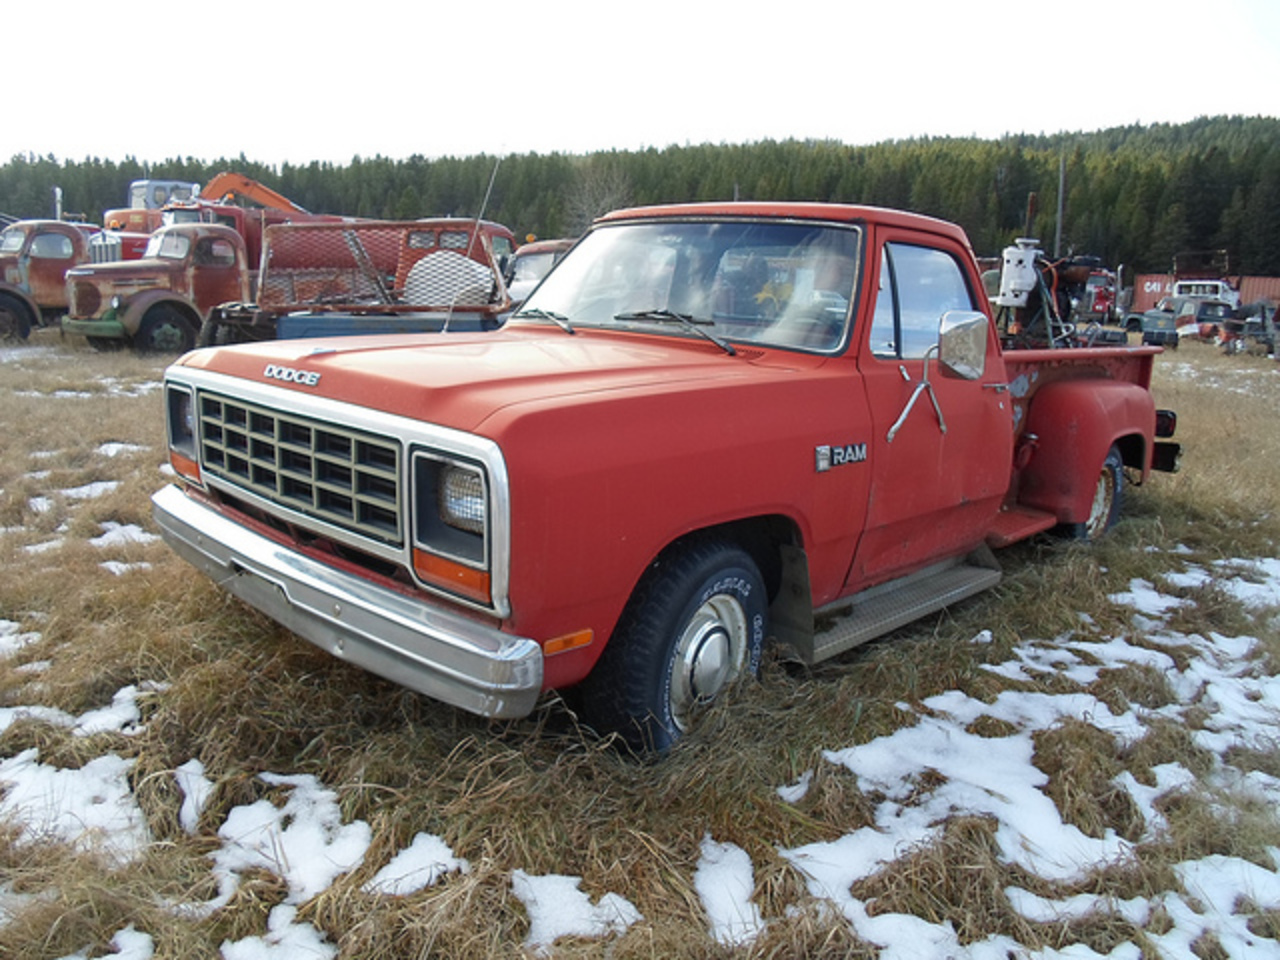 An 80s Dodge D-series pickup truck with an earlier sideside box.